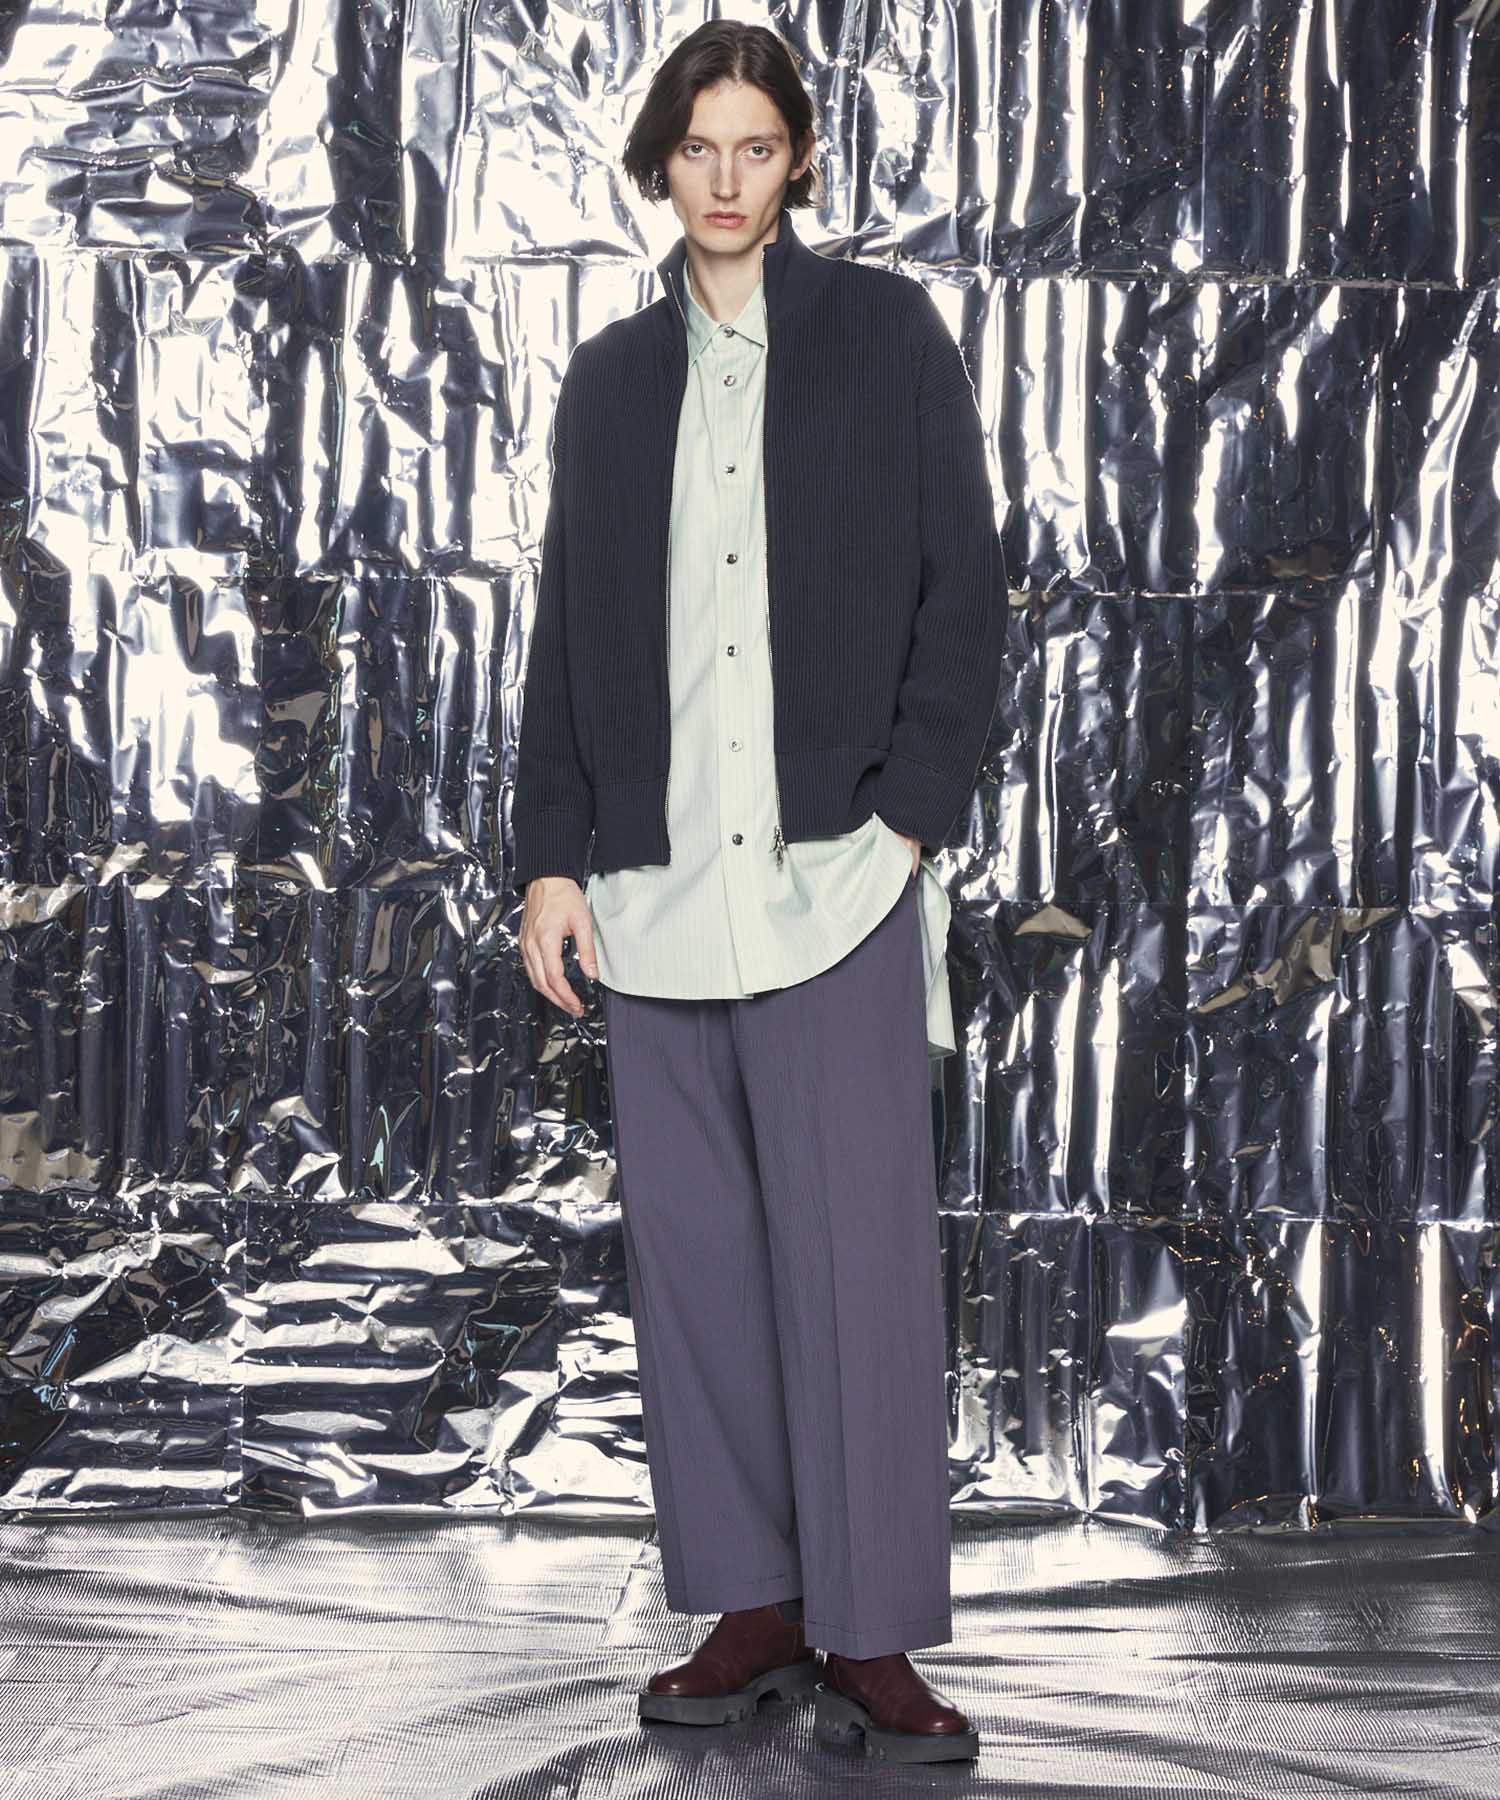 【LIMITED EDITION】One-Tuck Wide Pants